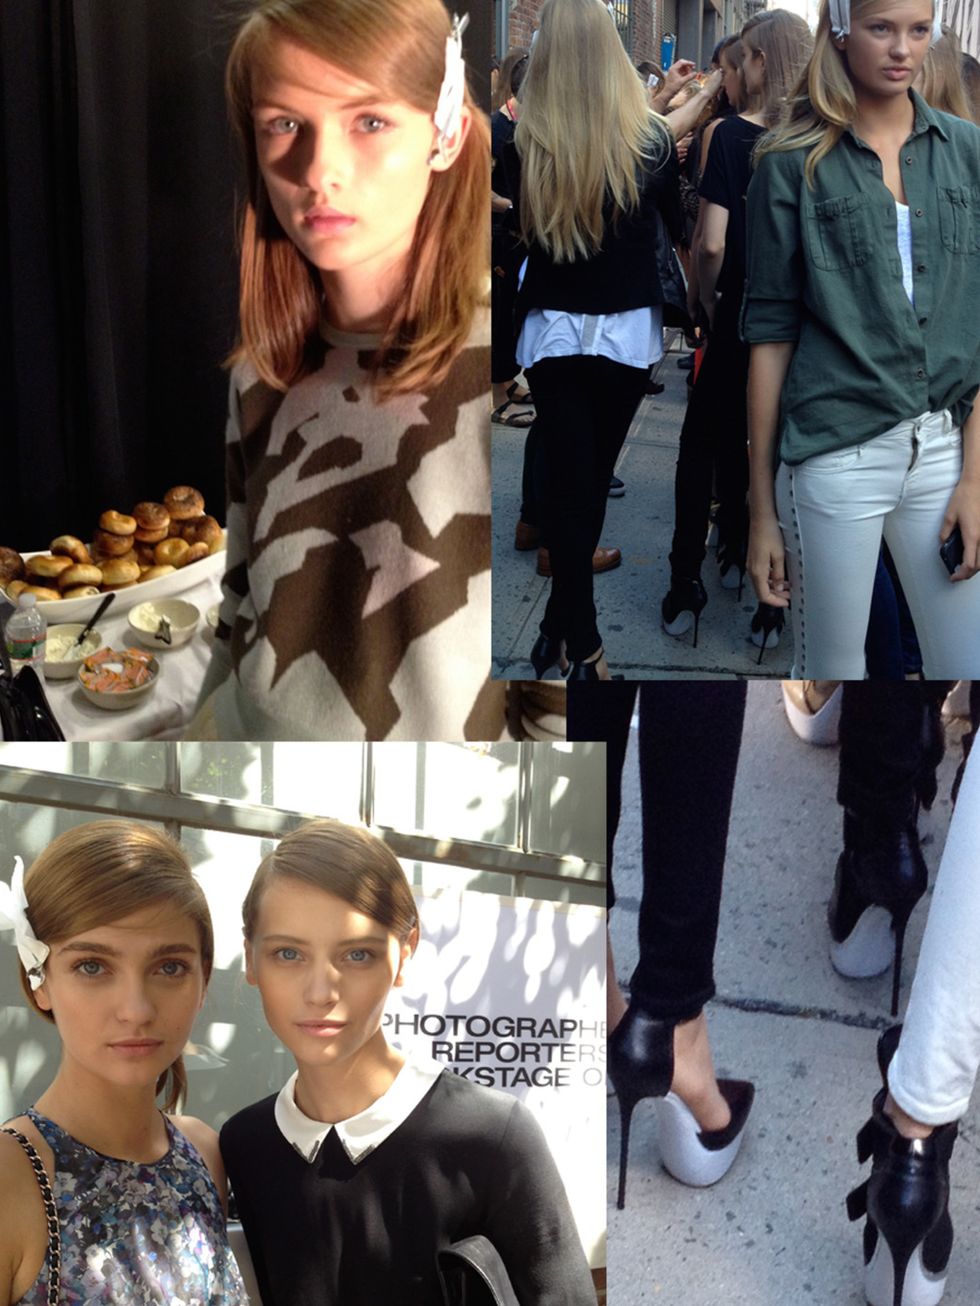 <p>The Show:?? <a href="http://www.elleuk.com/elle-tv/catwalk/dkny-spring-summer-2013">DKNY</a></p><p>The Place:?? New York</p><p>Time:?? 9th September, 10.30am</p><p>The Look: Entering off the street for the show, the vibe is already laid back and calm, 